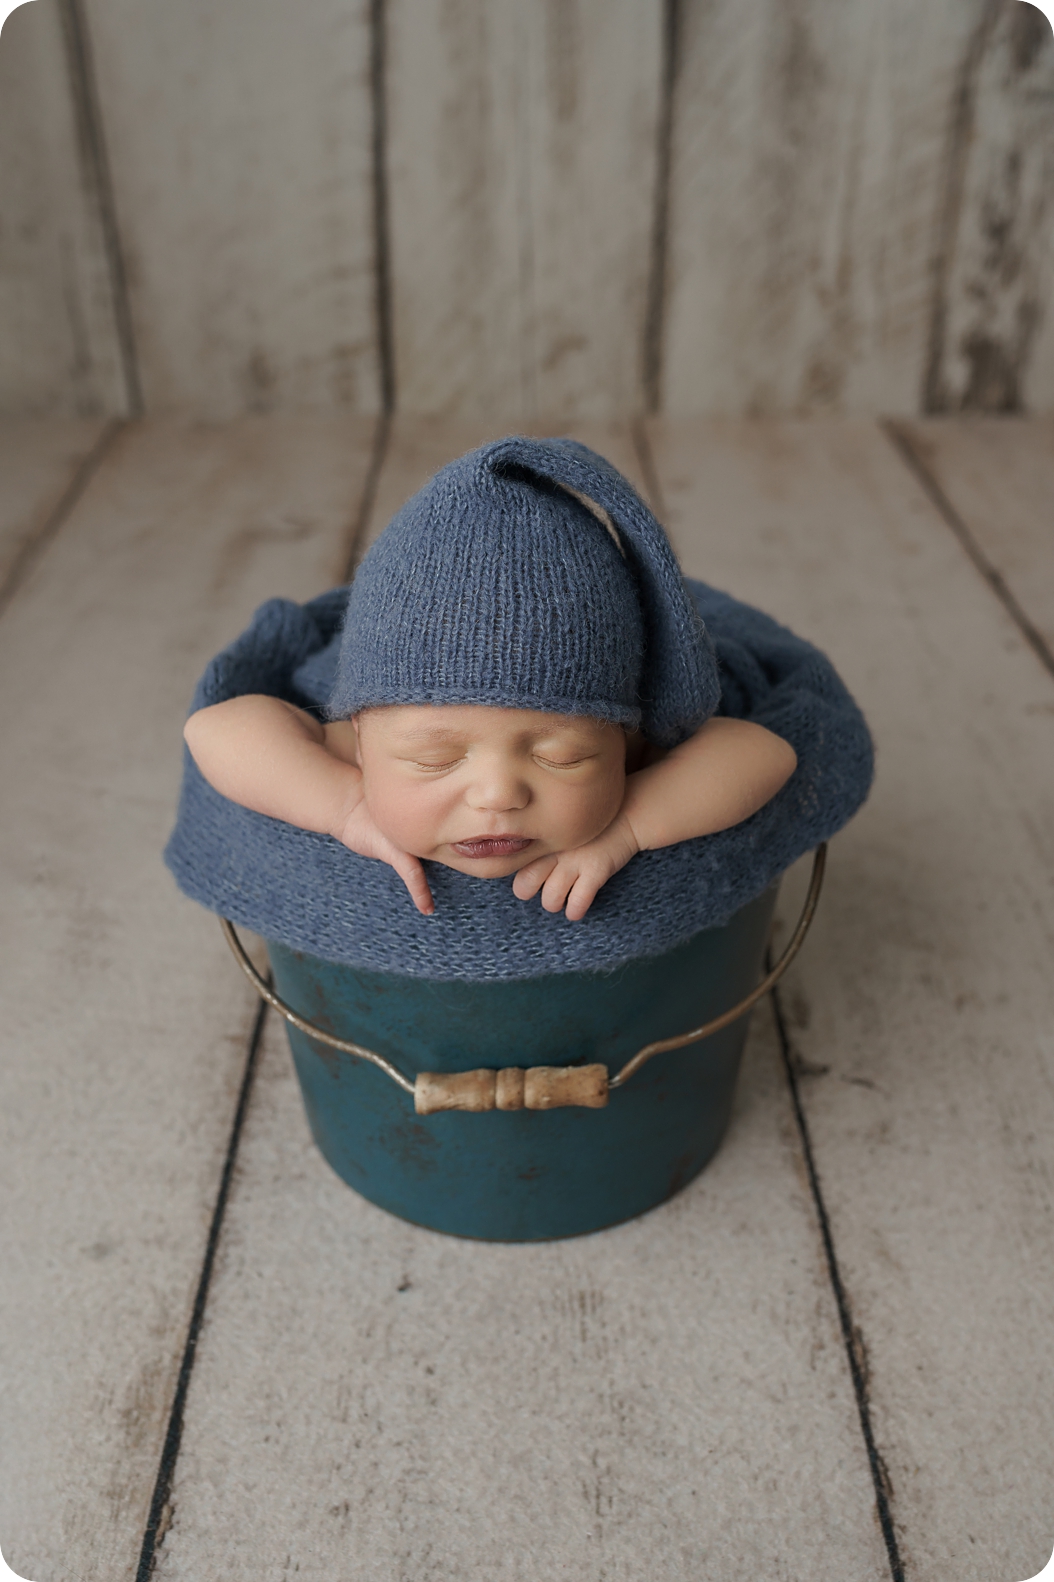 baby in blue knit cap sleeps in pail during Simple Studio Newborn Portraits